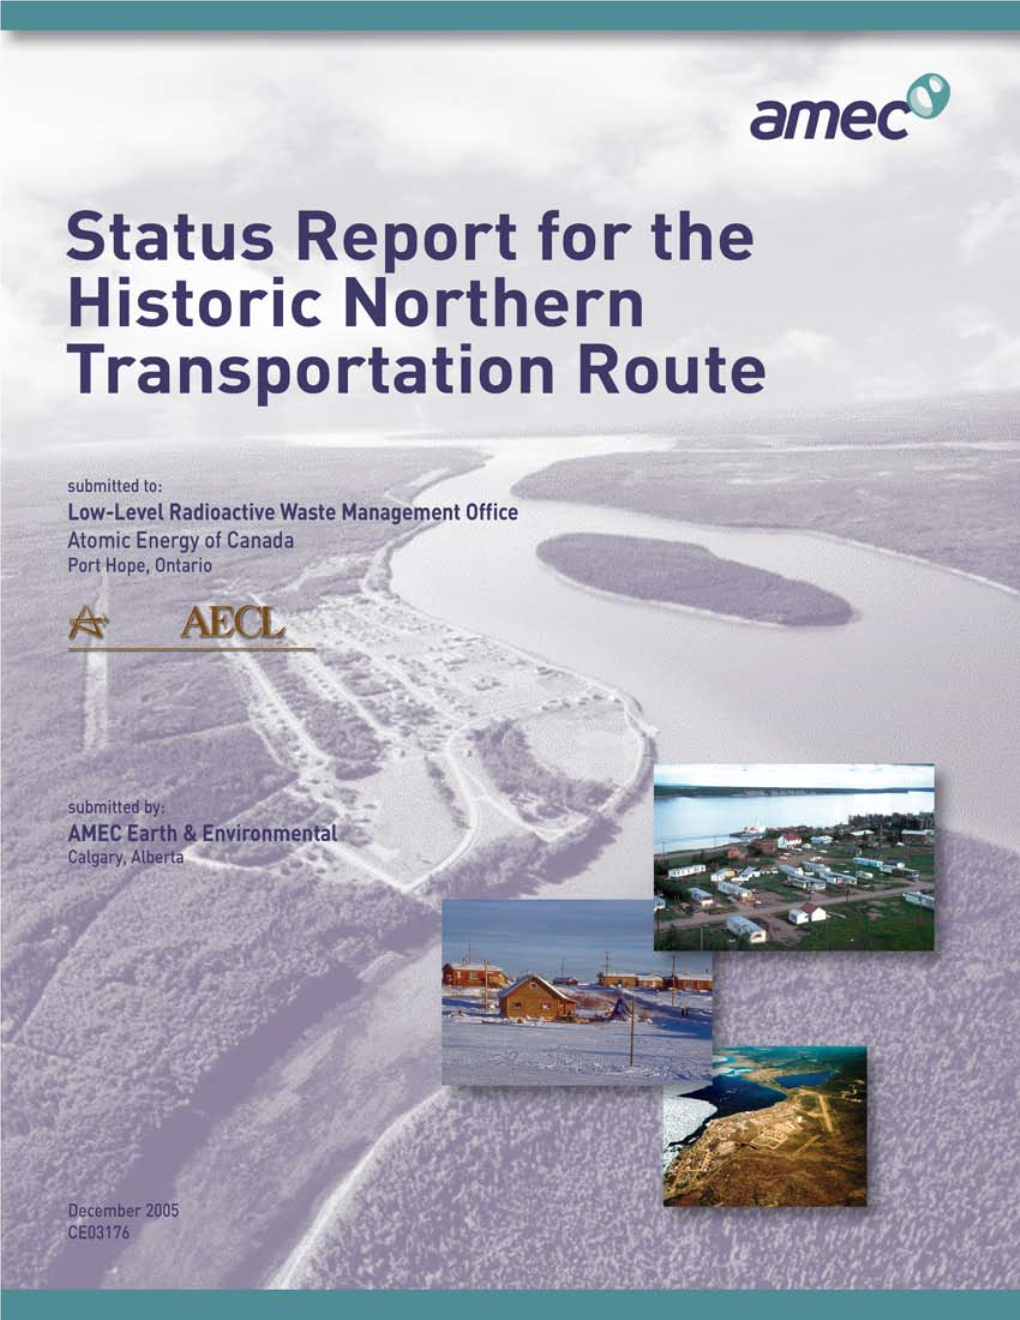 Status Report for the Historic Northern Transportation Route (NTR)